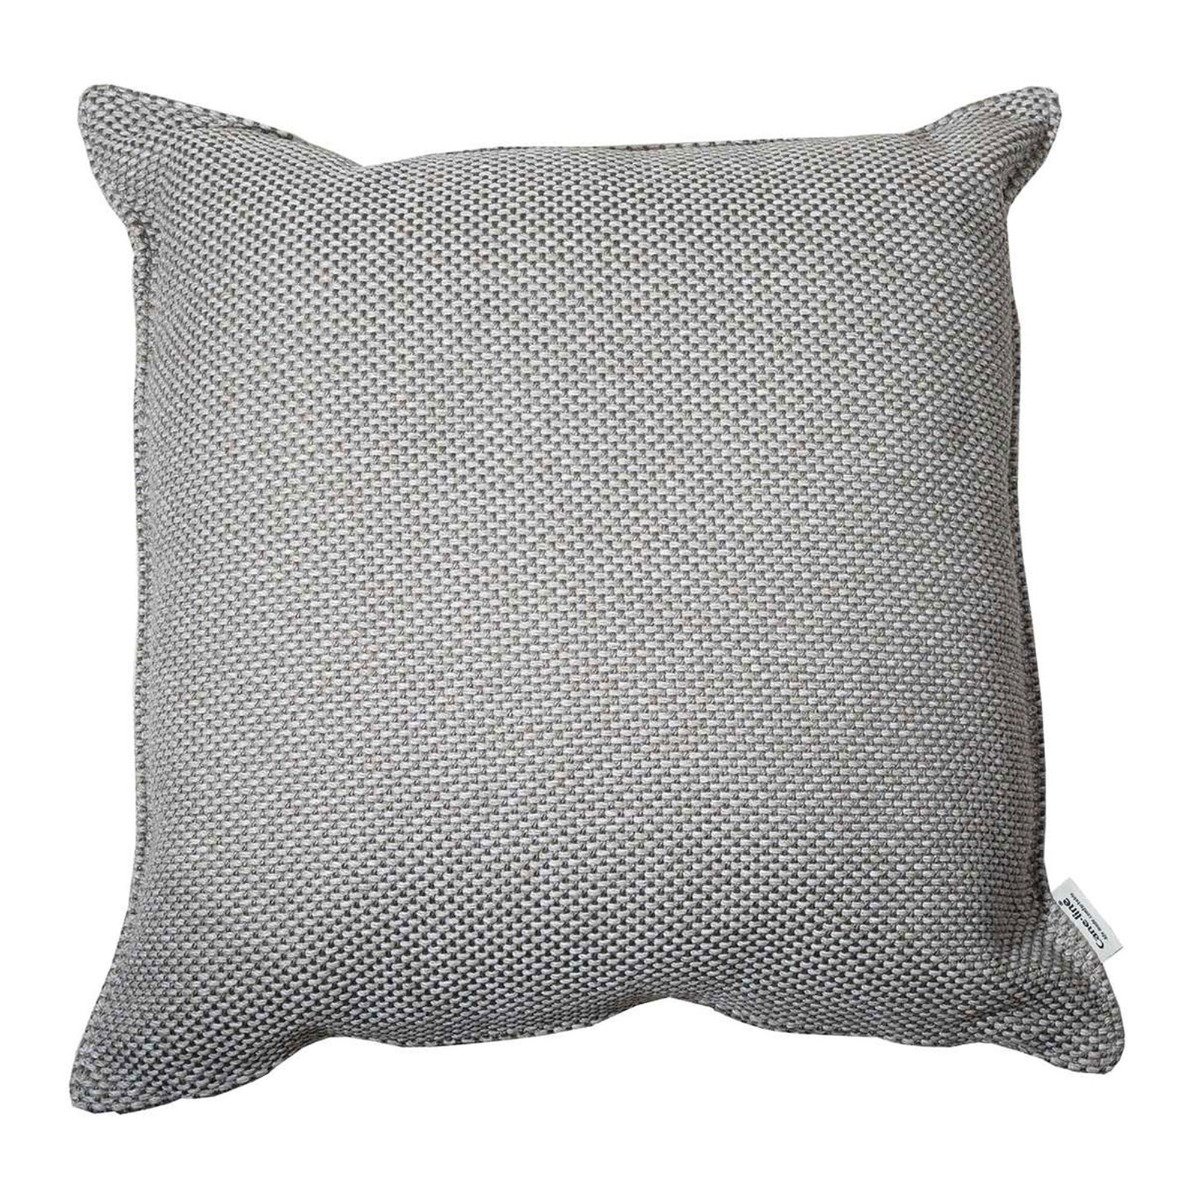 Cane Line Focus Scatter Cushion 50x50x12cm, Square, Grey | Barker & Stonehouse